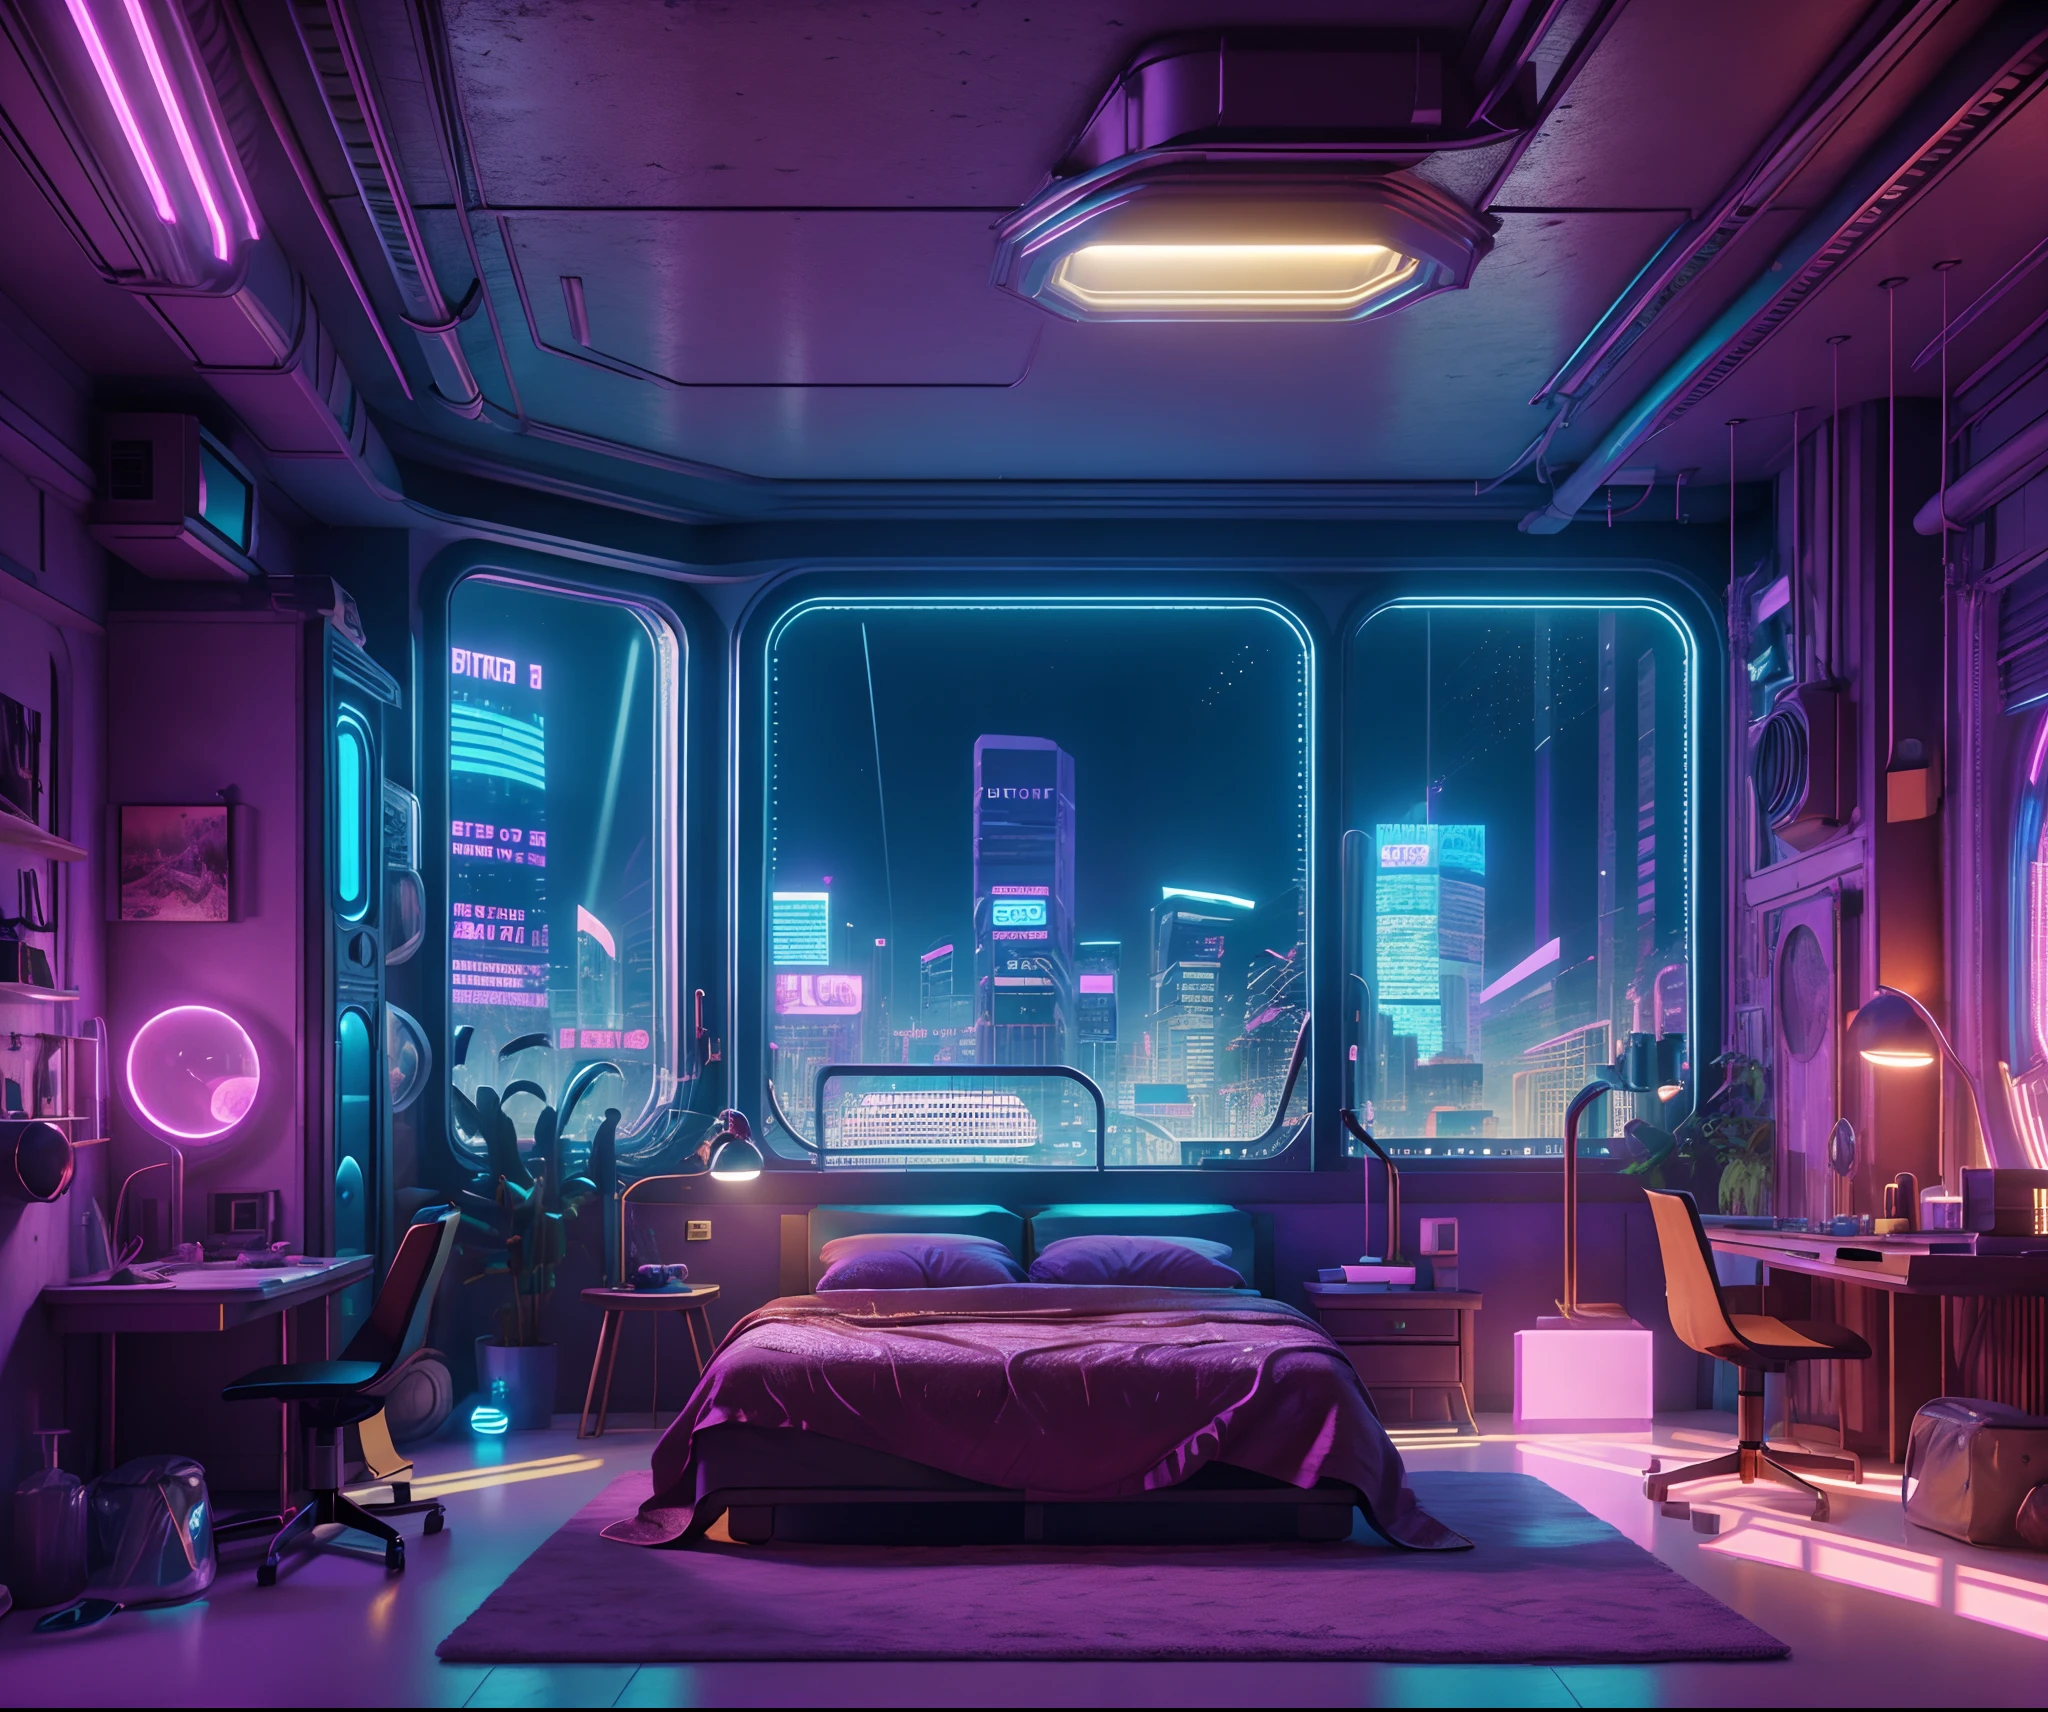 ((masterpiece)), (ultra-detailed), (intricate details), (high resolution CGI artwork 8k), Create an image of a small realistic antique (bedroom) at nighttime with warm and pastel coloring and light. One of the walls should feature a big window with a busy, colorful, and detailed (cyberpunk), synthwave, neon cityscape. The city should have a futuristic style with lots of colors, neon lights, signs, and differently-sized buildings. The cityscape should be extremely detailed with depth of field. The city should have a lot of visual interest with many small details. Utilize atmospheric and ambient lighting to create depth and evoke the feel of a busy futuristic city outside the window. Pay close attention to details like intricate, hires eyes and 90s bedroom accents. Camera: wide shot showing the bed or desk and the window. The window should be the focal point of the image. Lighting: use atmospheric and volumetric lighting to enhance the cityscape details. The room should be illuminated by the neon lights from the cityscape.